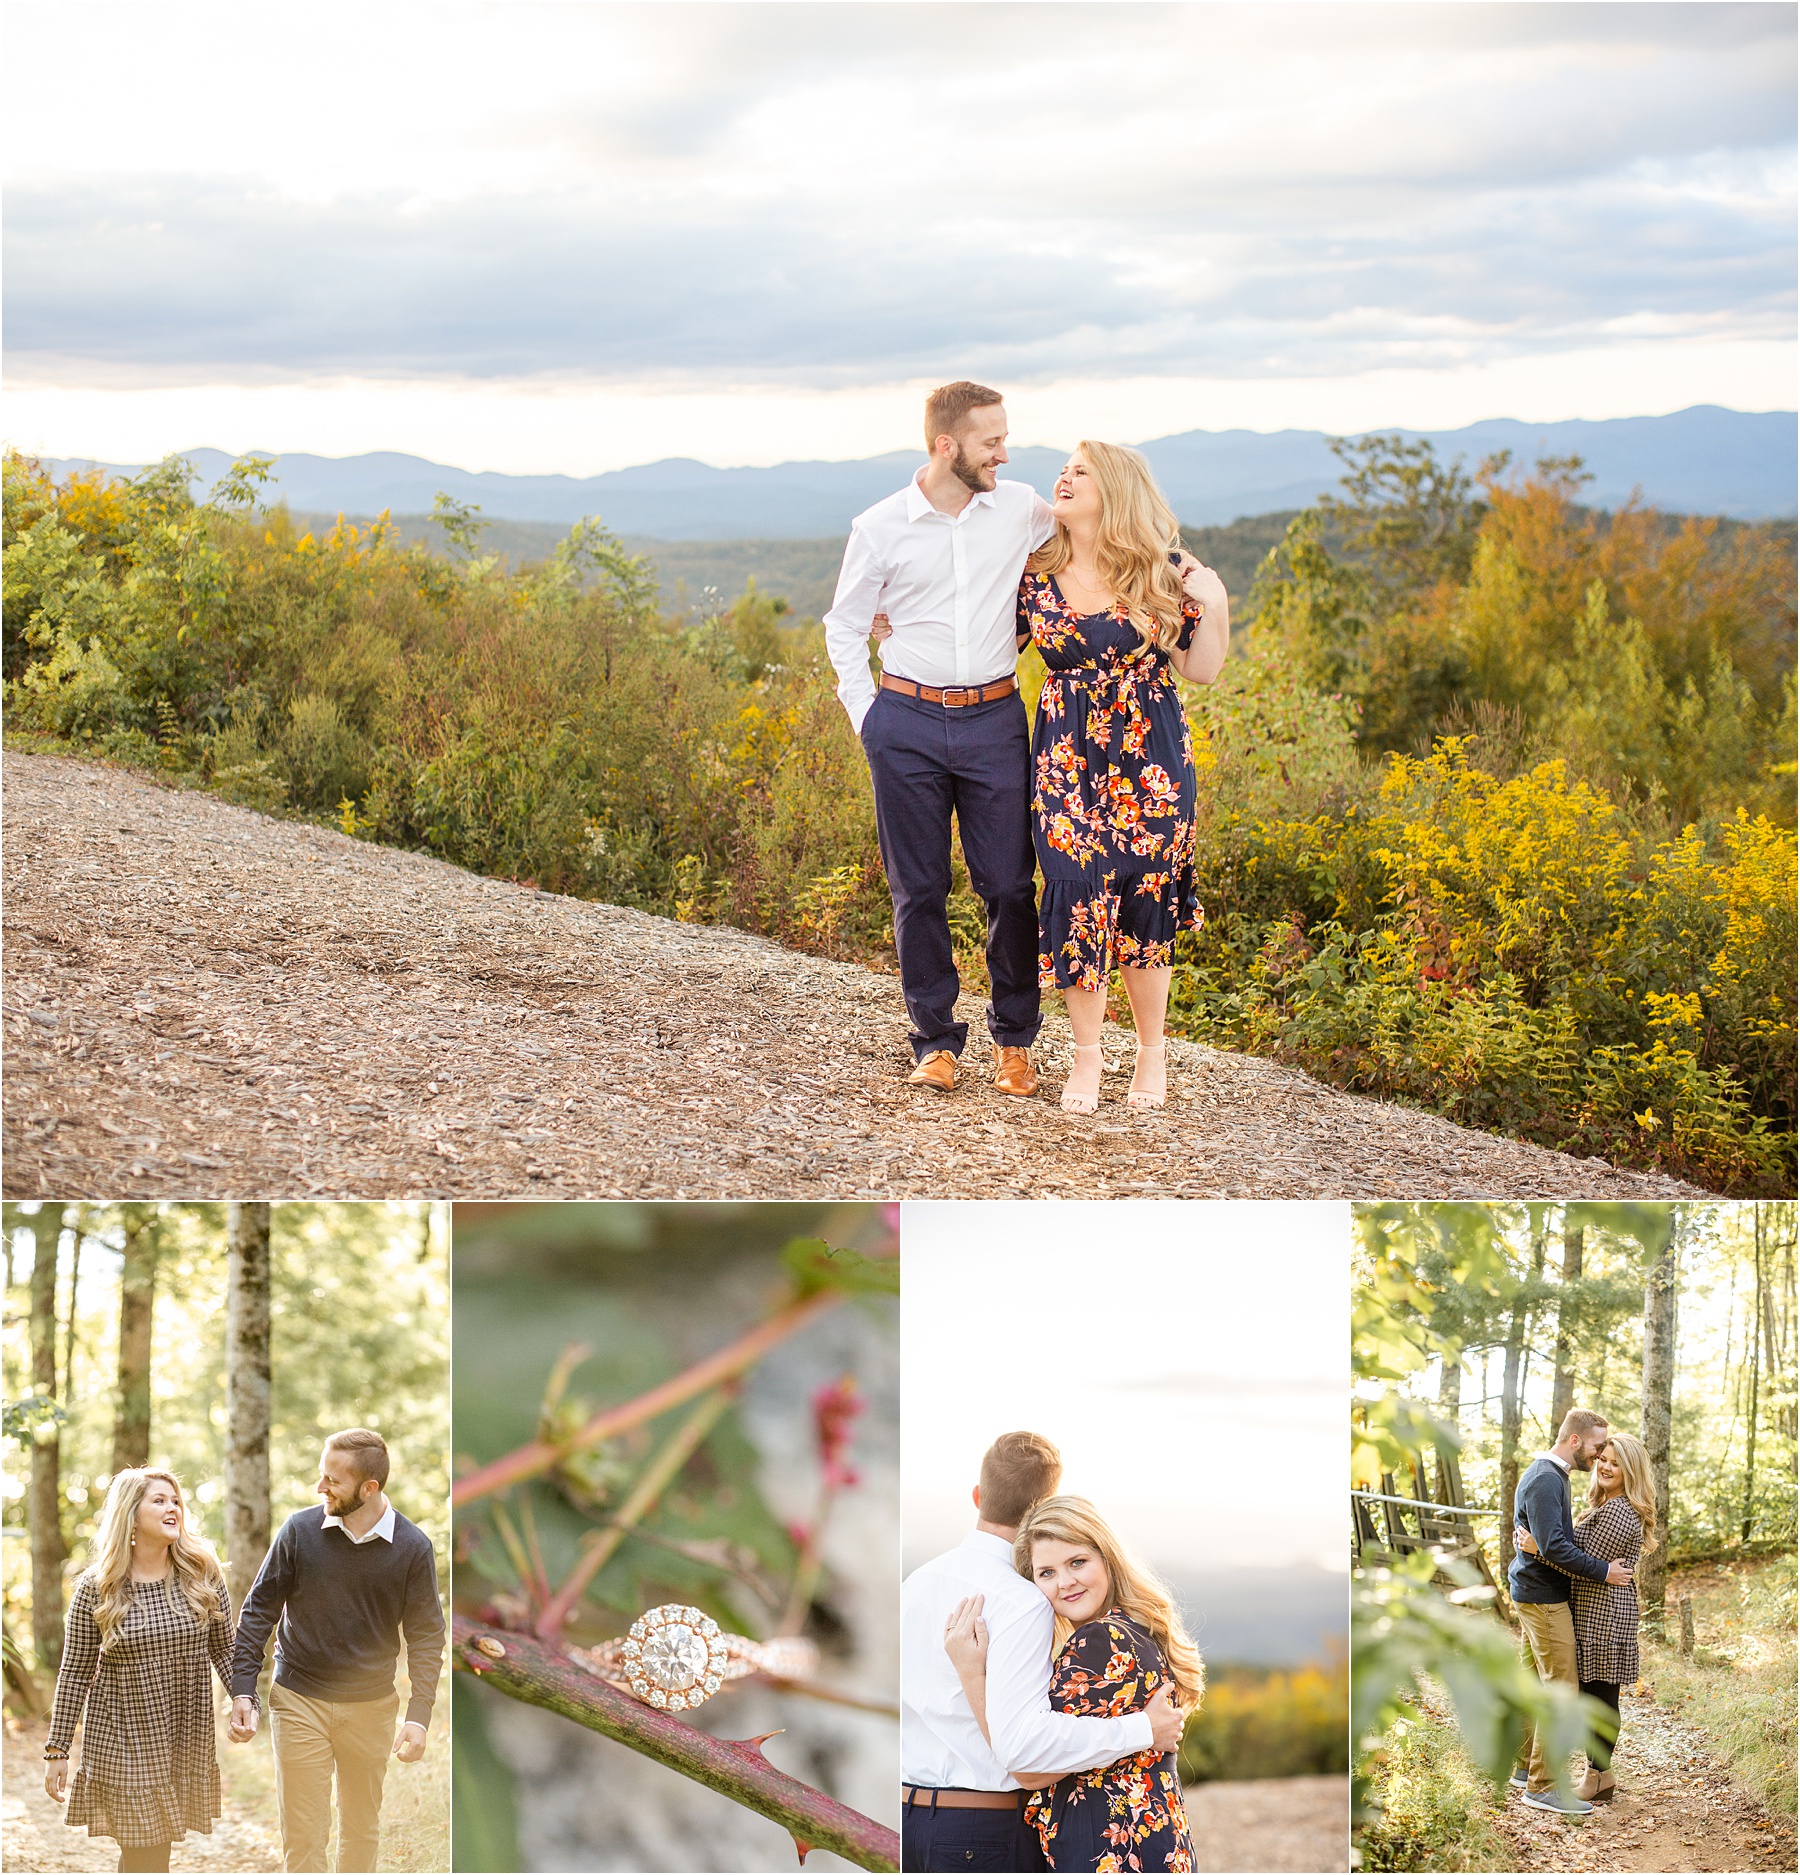 Sasafrass mountain engagement pictures, Pickens SC